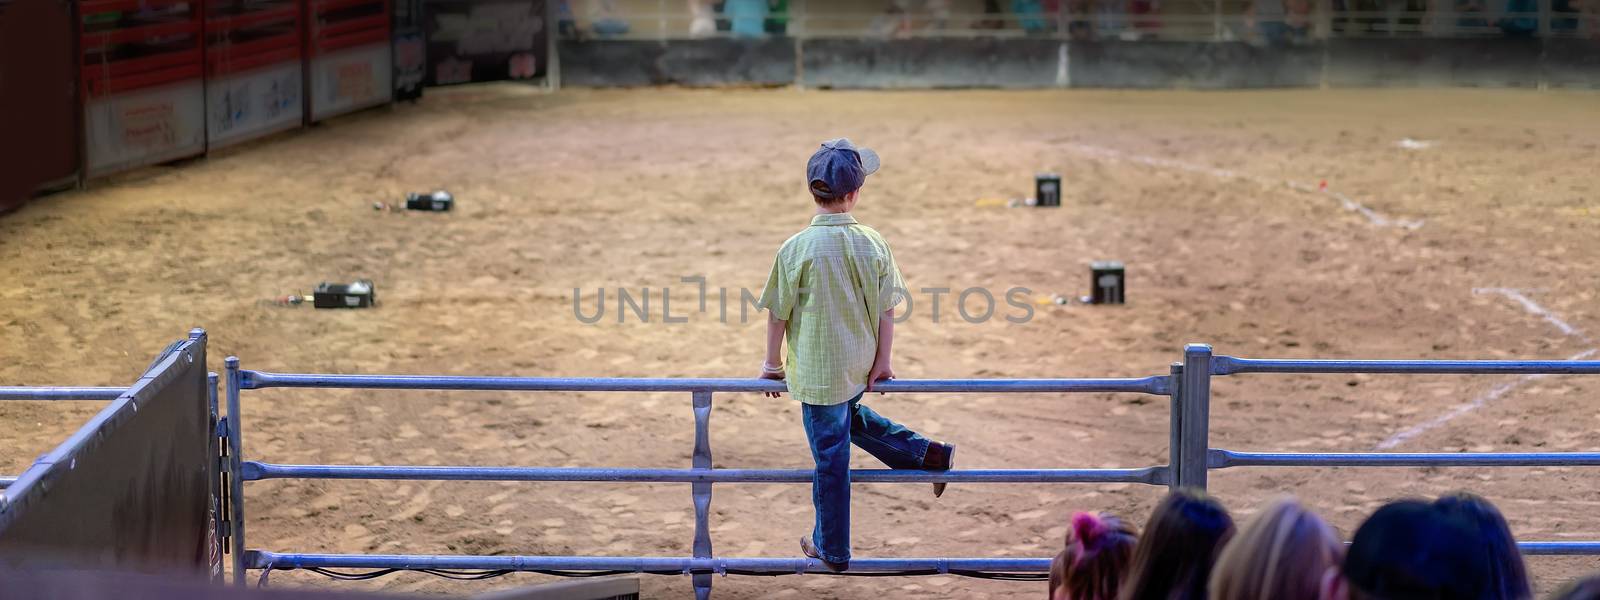 Young On Fence Watching Rodeo by 	JacksonStock